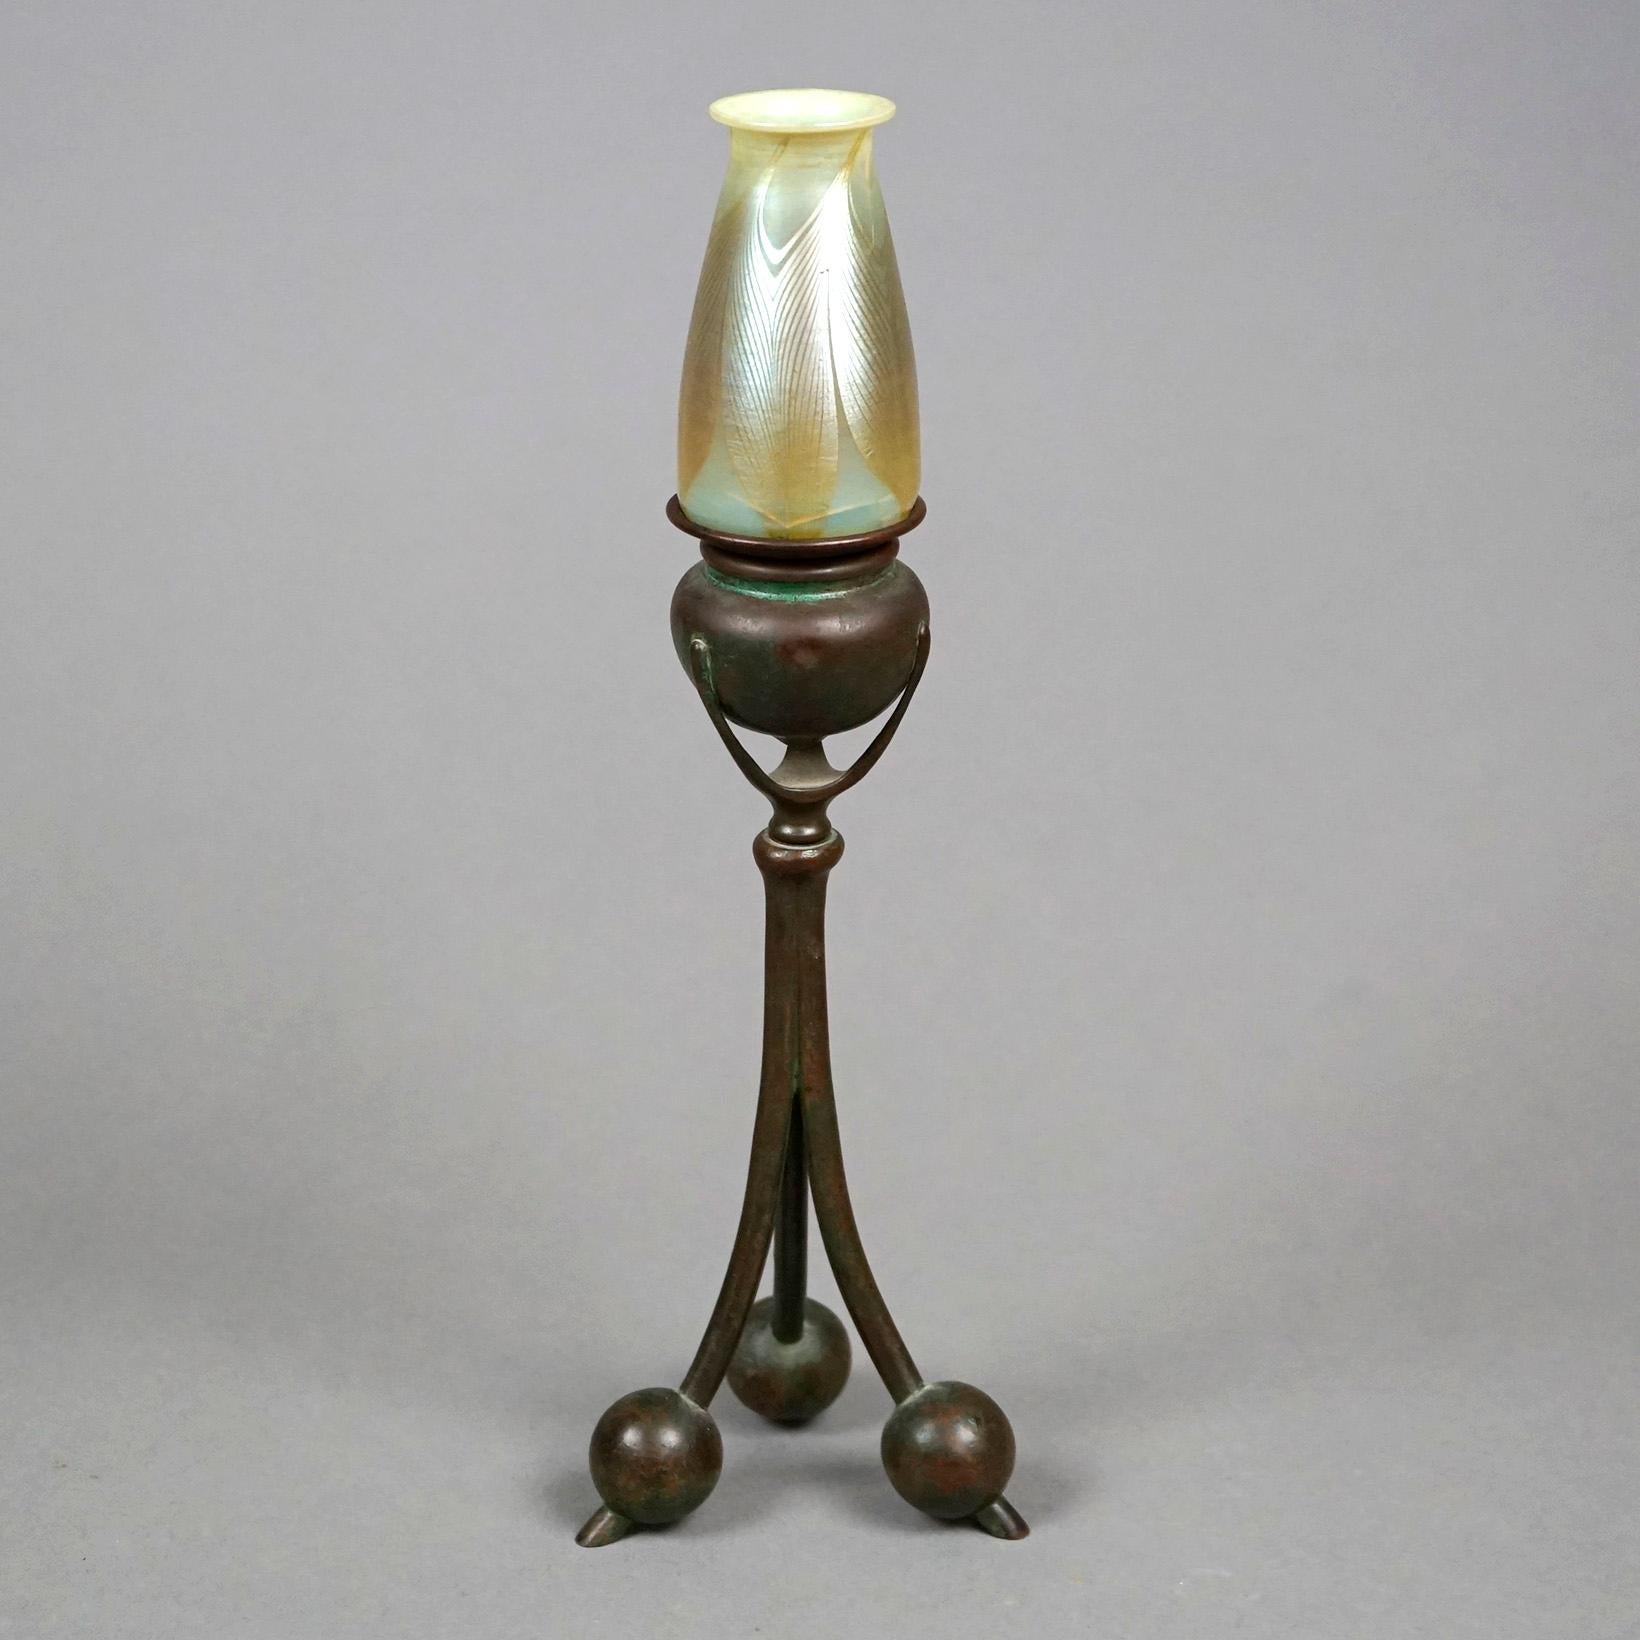 Cast Tiffany Bronze Candlestick & Favrile Feather Art Glass Shade, Signed, c1920